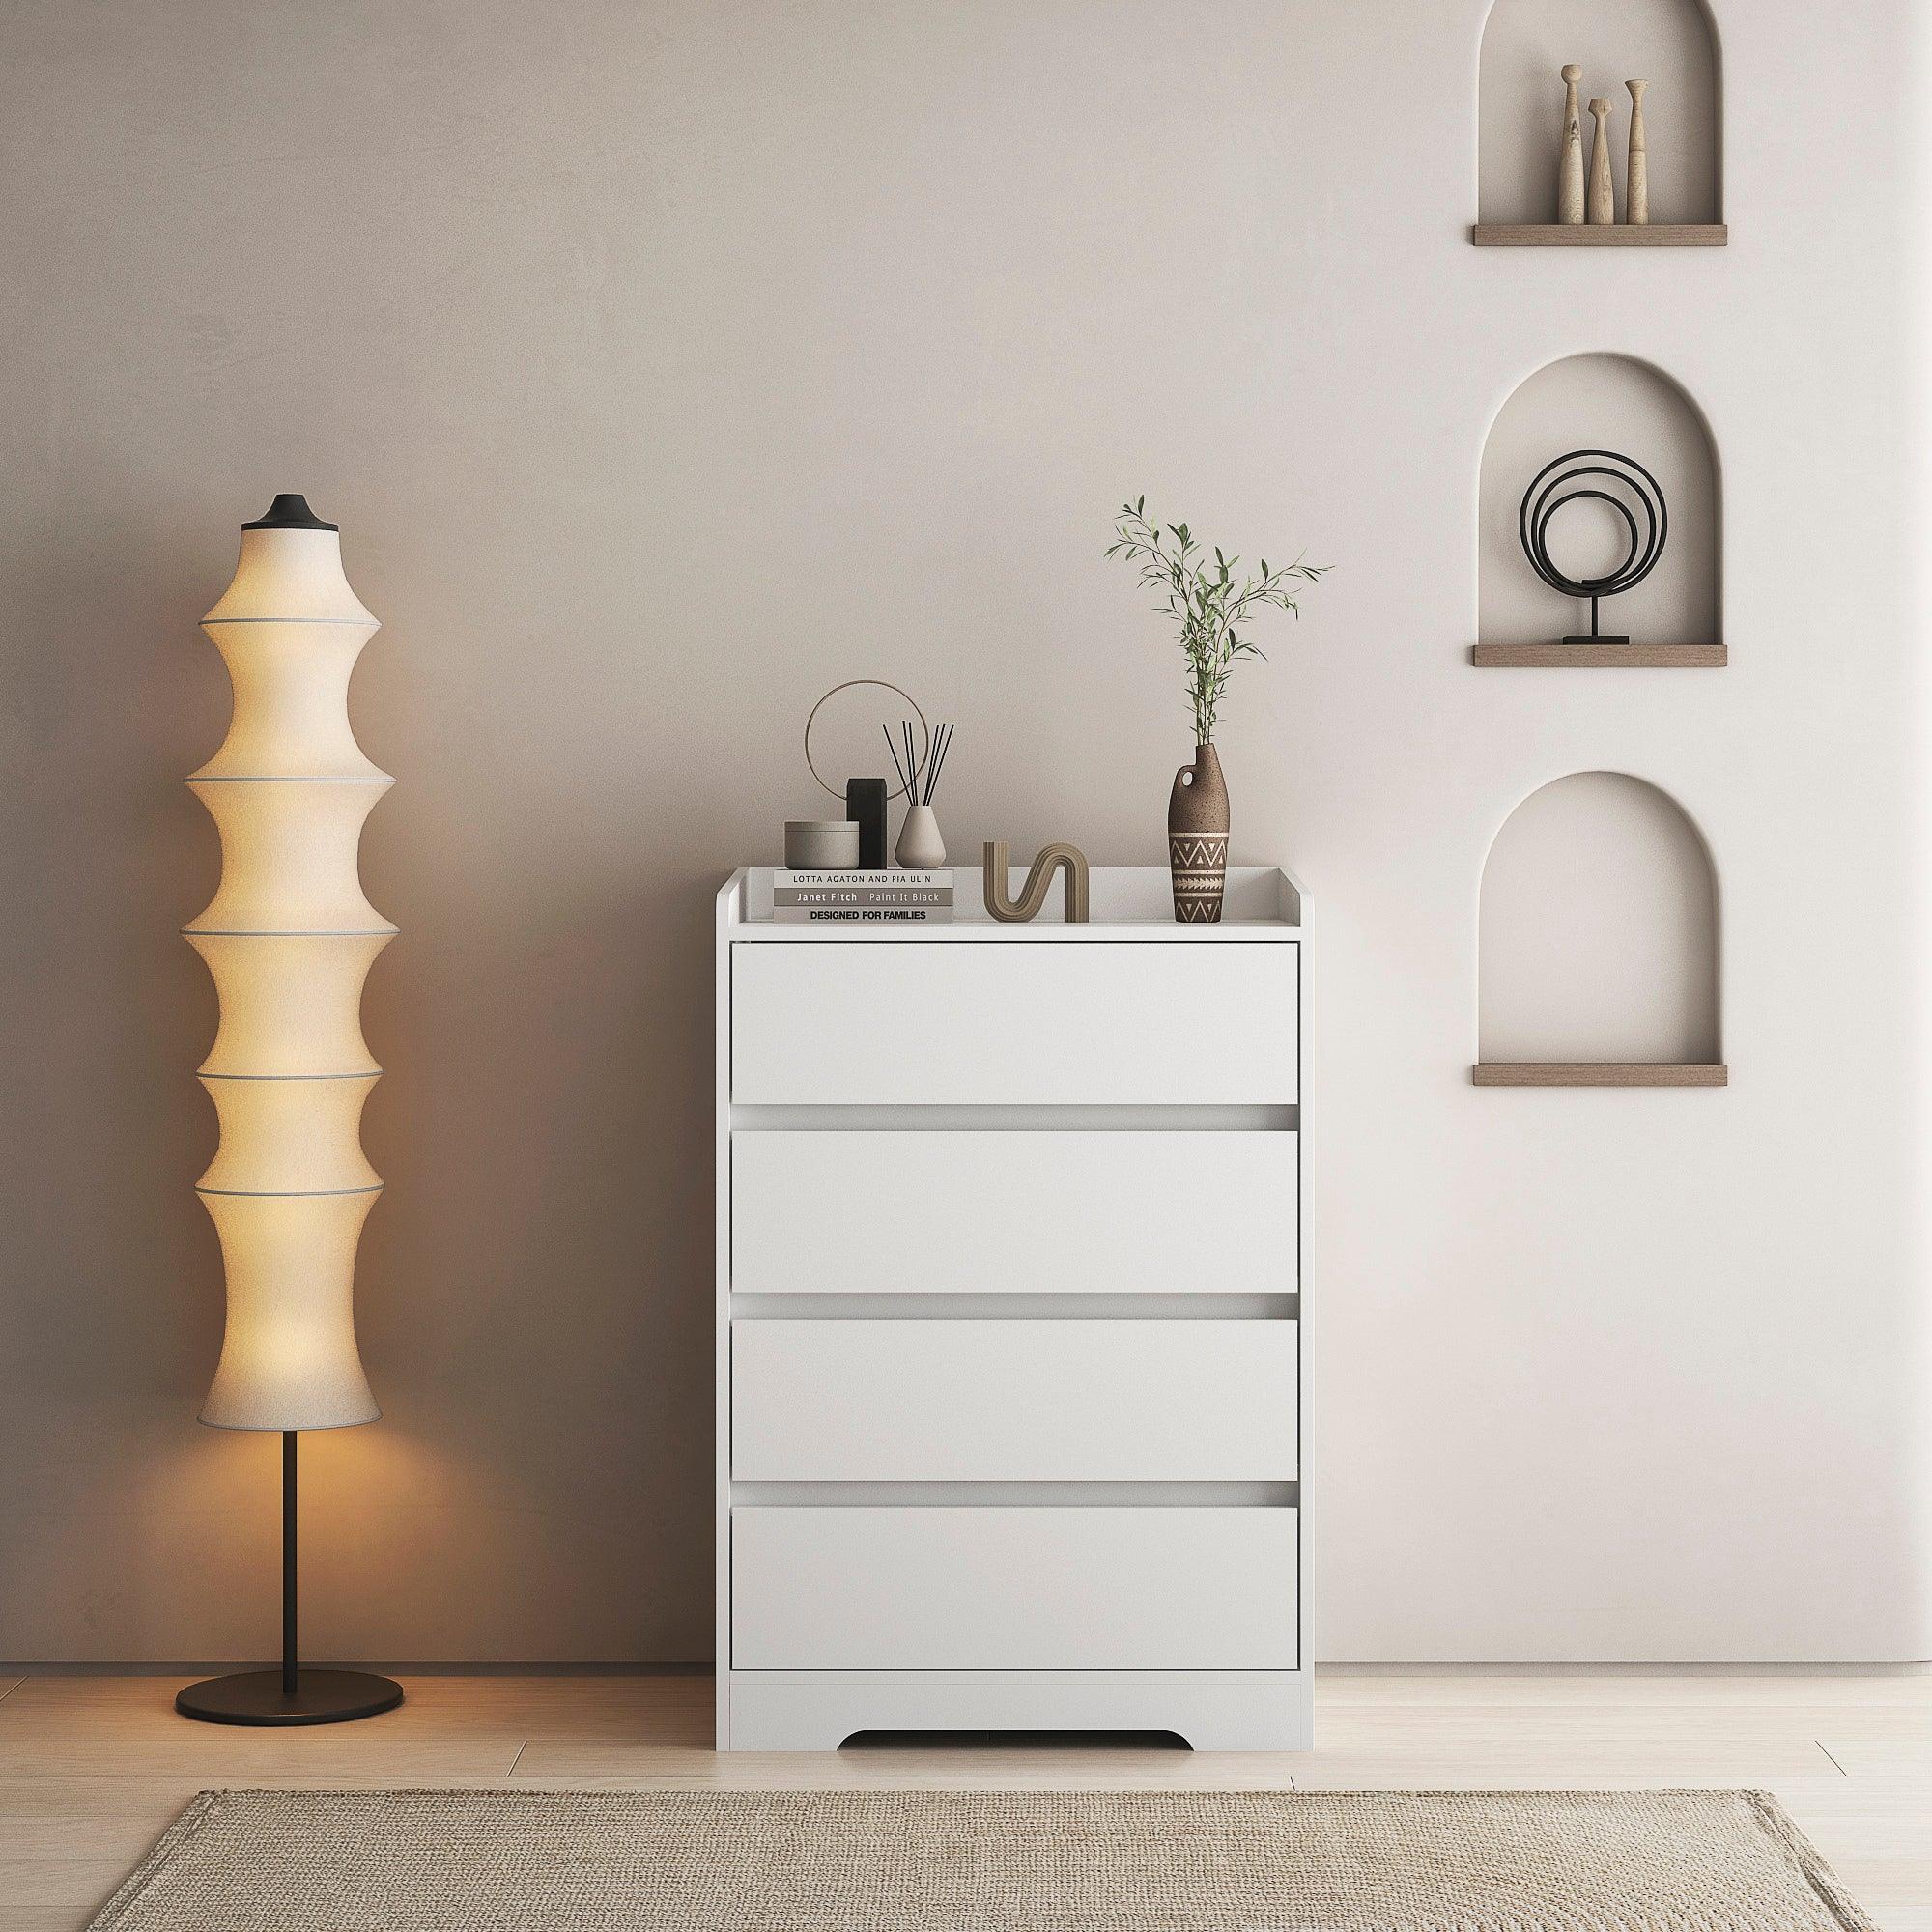 🆓🚛 4 Drawer Dresser, Chest of Drawers Without Handle, White Dresser for Bedroom 100% Waterproof, Modern Wooden Cabinet With Sturdy Frame for Living Room, Entryway, Bedroom, Hallway, Office